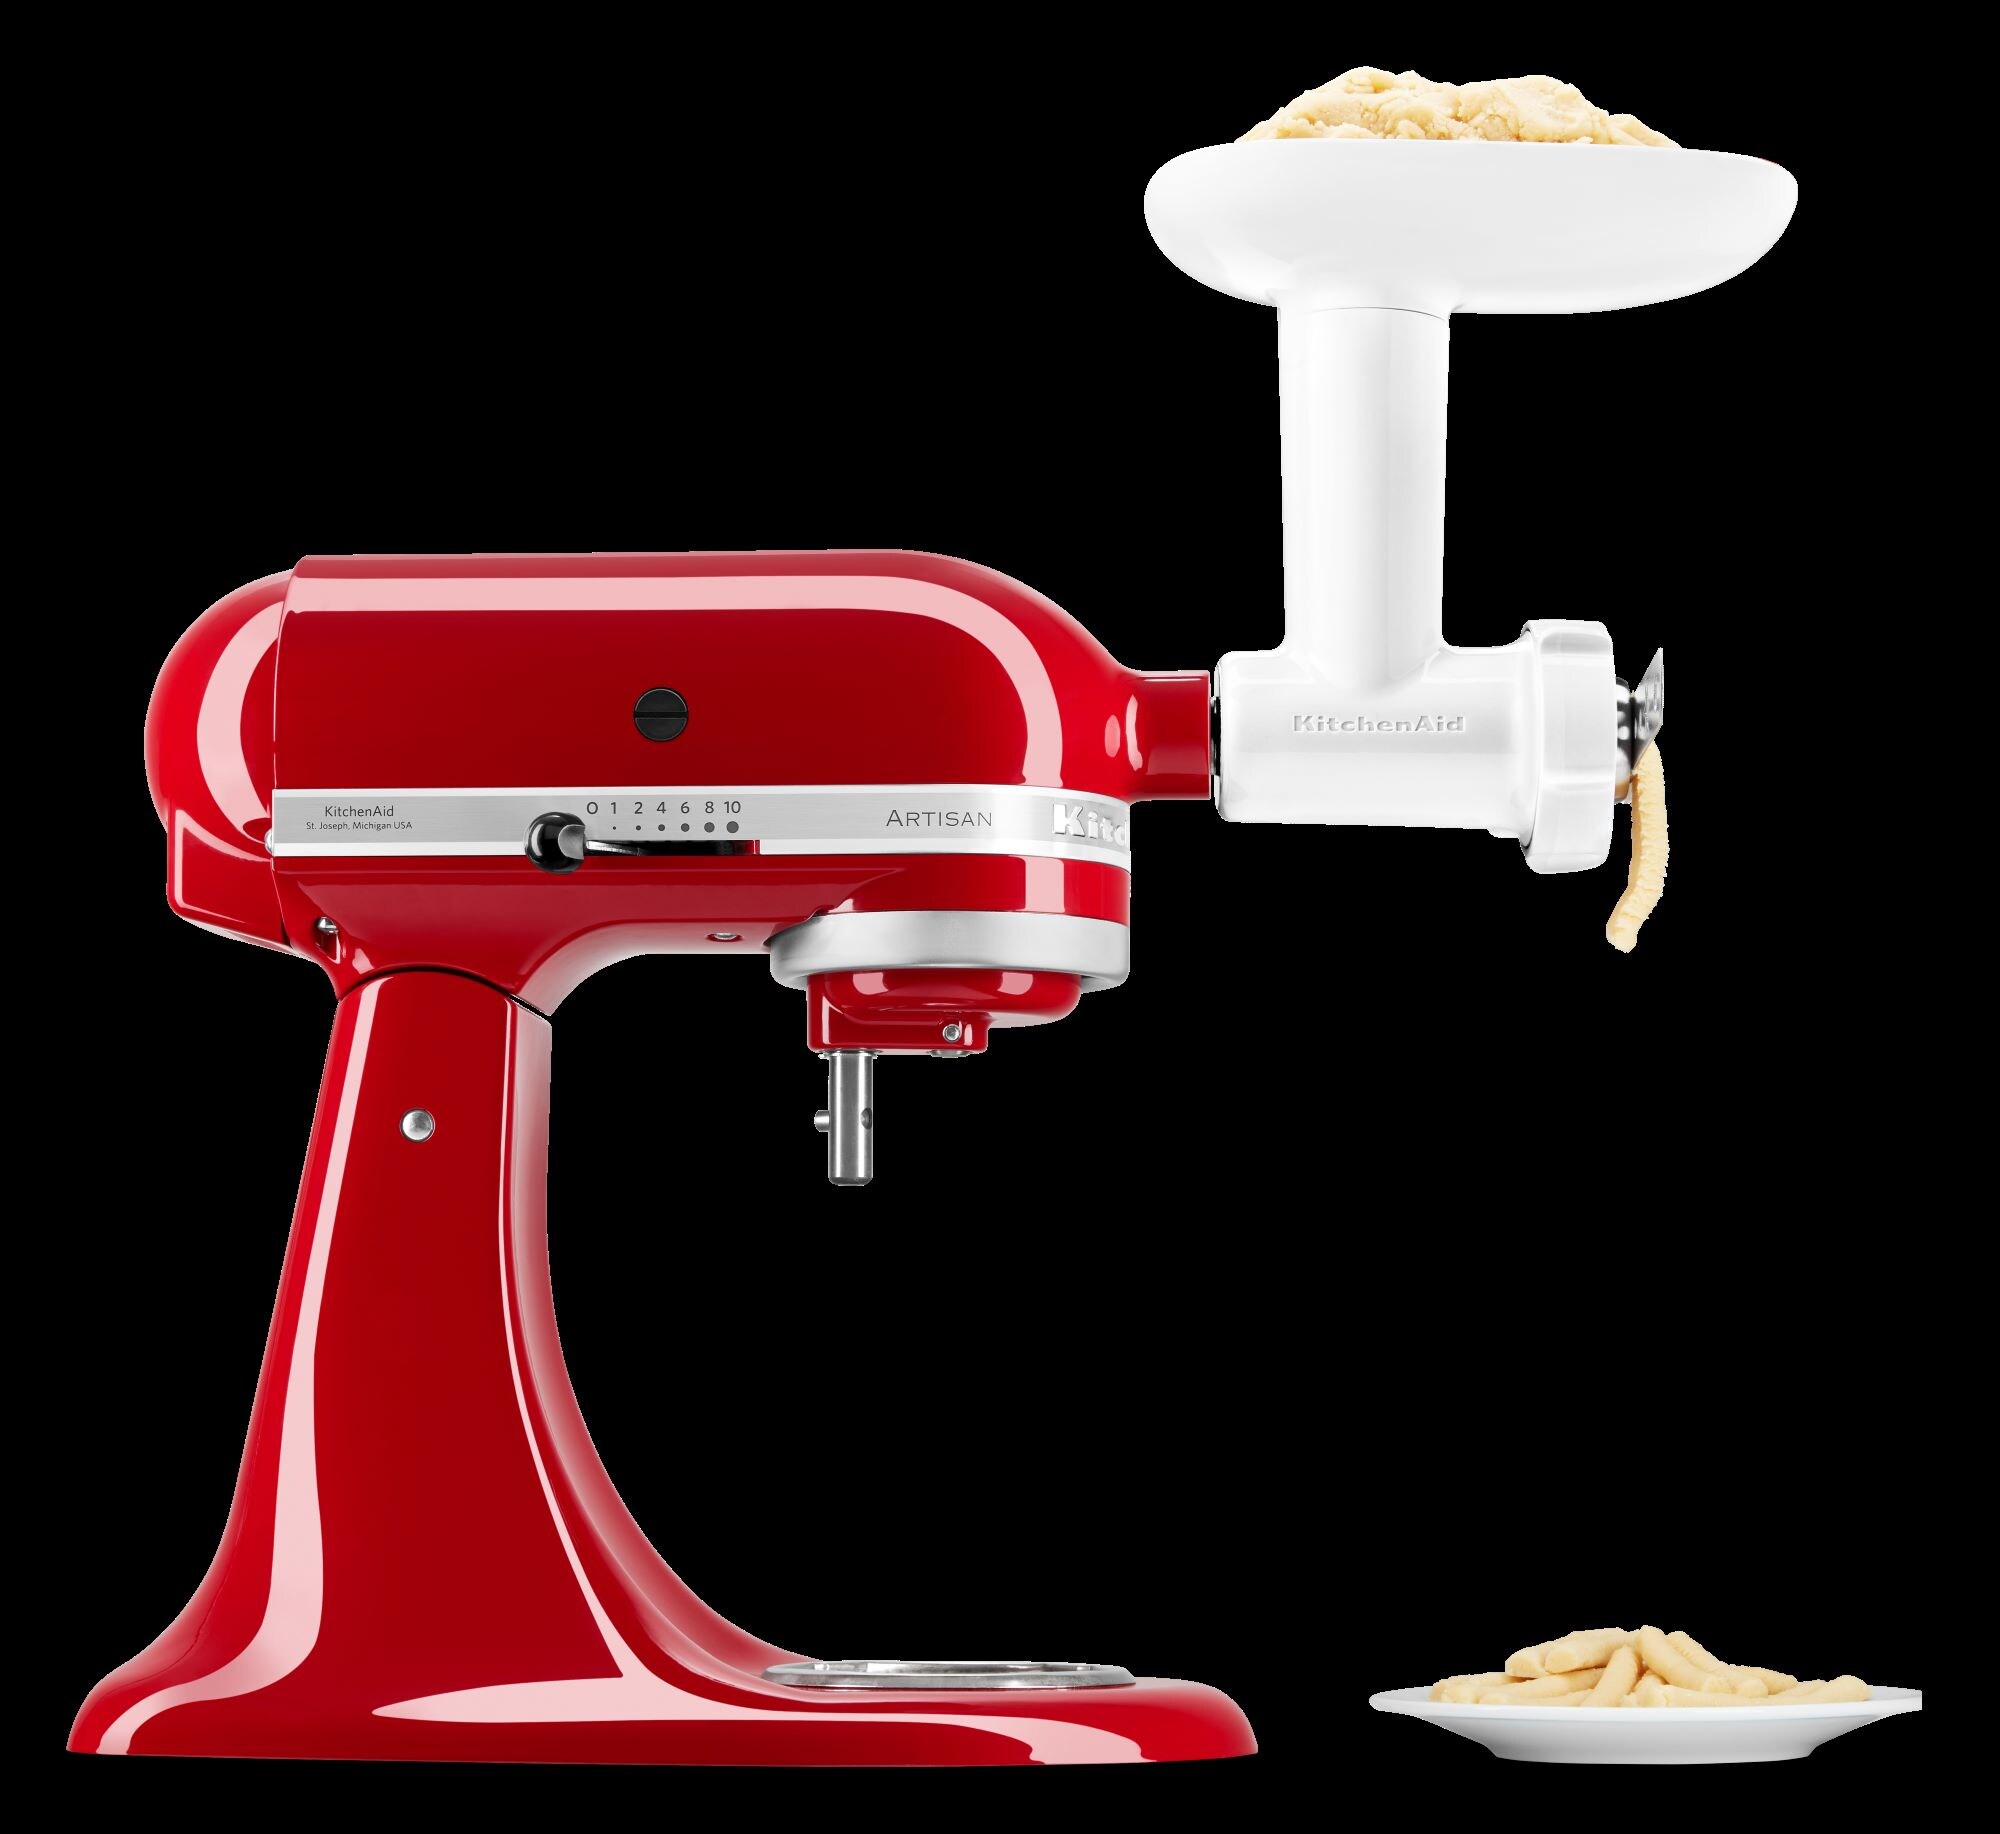 KitchenAid Residential Plastic Food Grinder Attachment in the